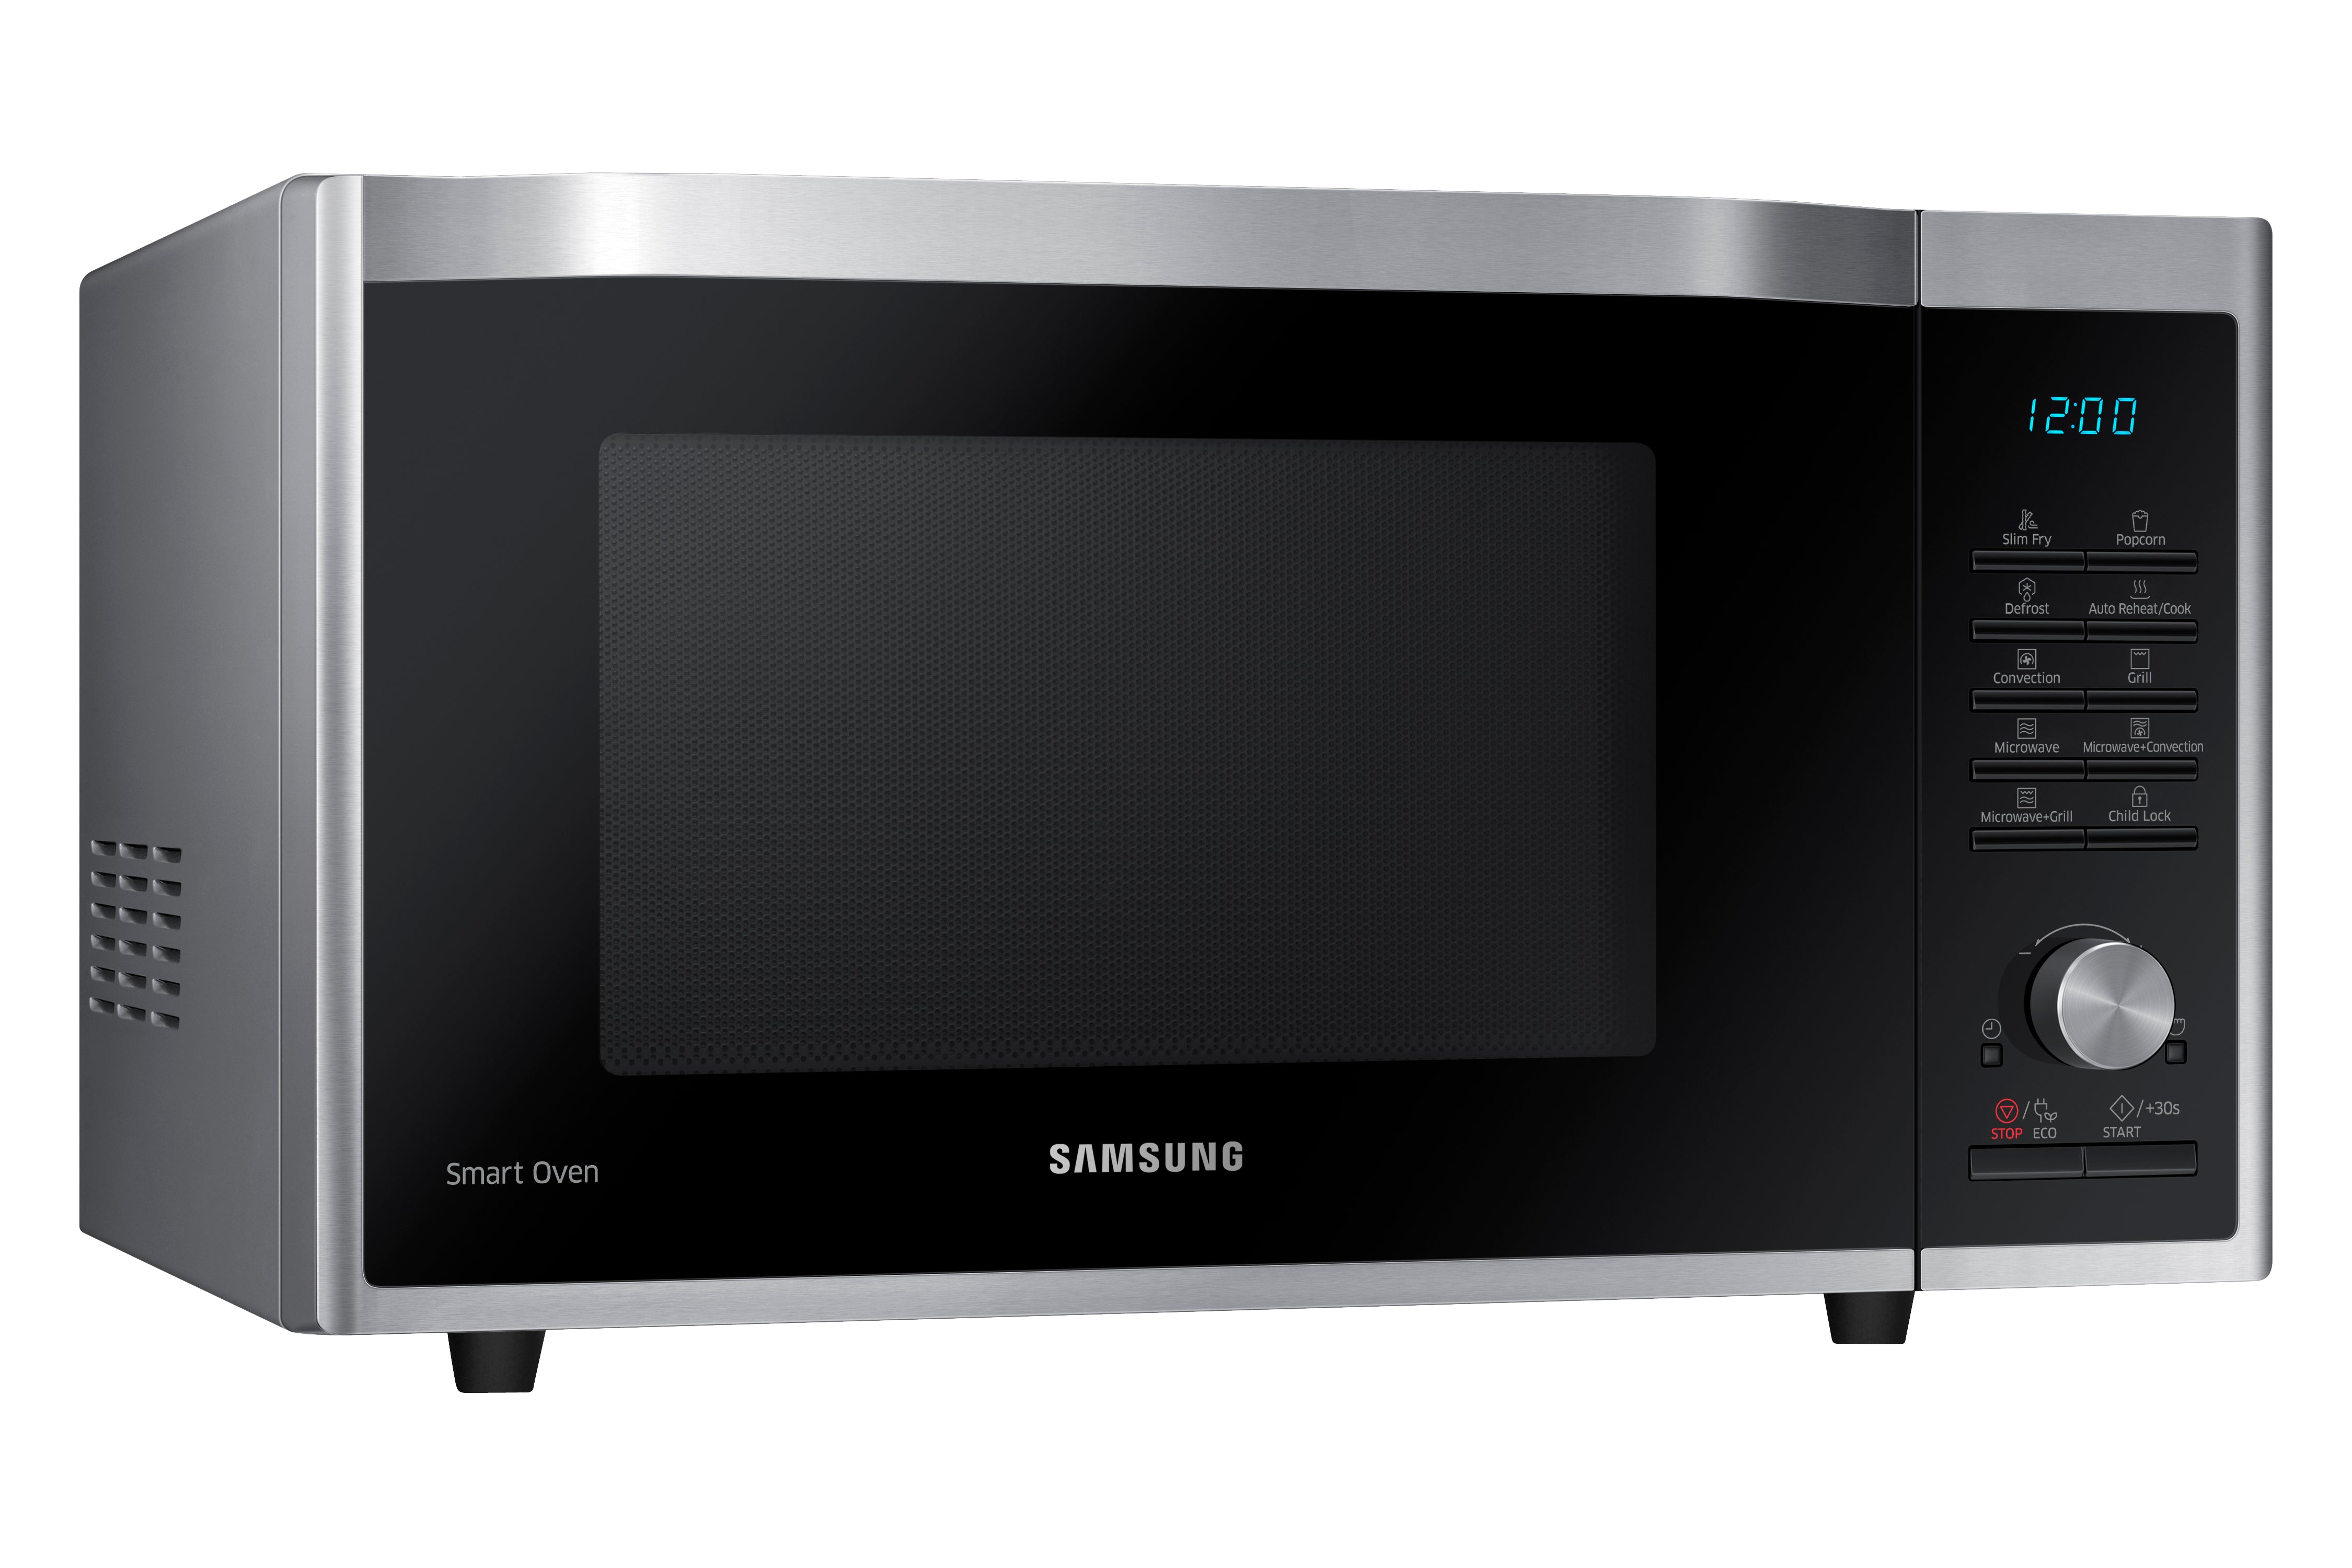 Samsung - 1.1 cu. Ft  Counter top Microwave in Stainless - MC11J7033CT